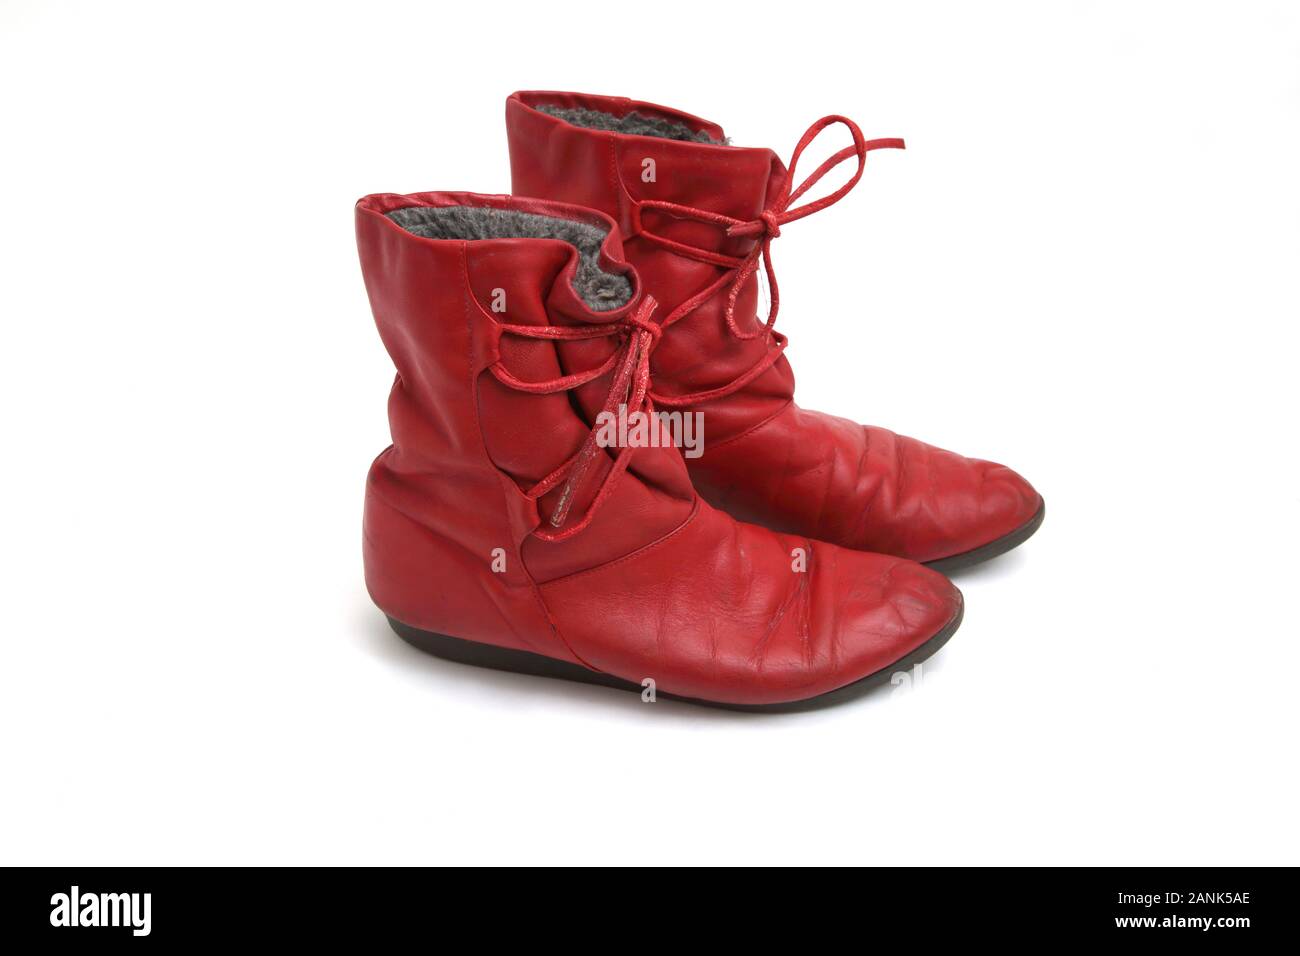 A Pair of Red leather Lace Up Boots with Warm Lining Stock Photo